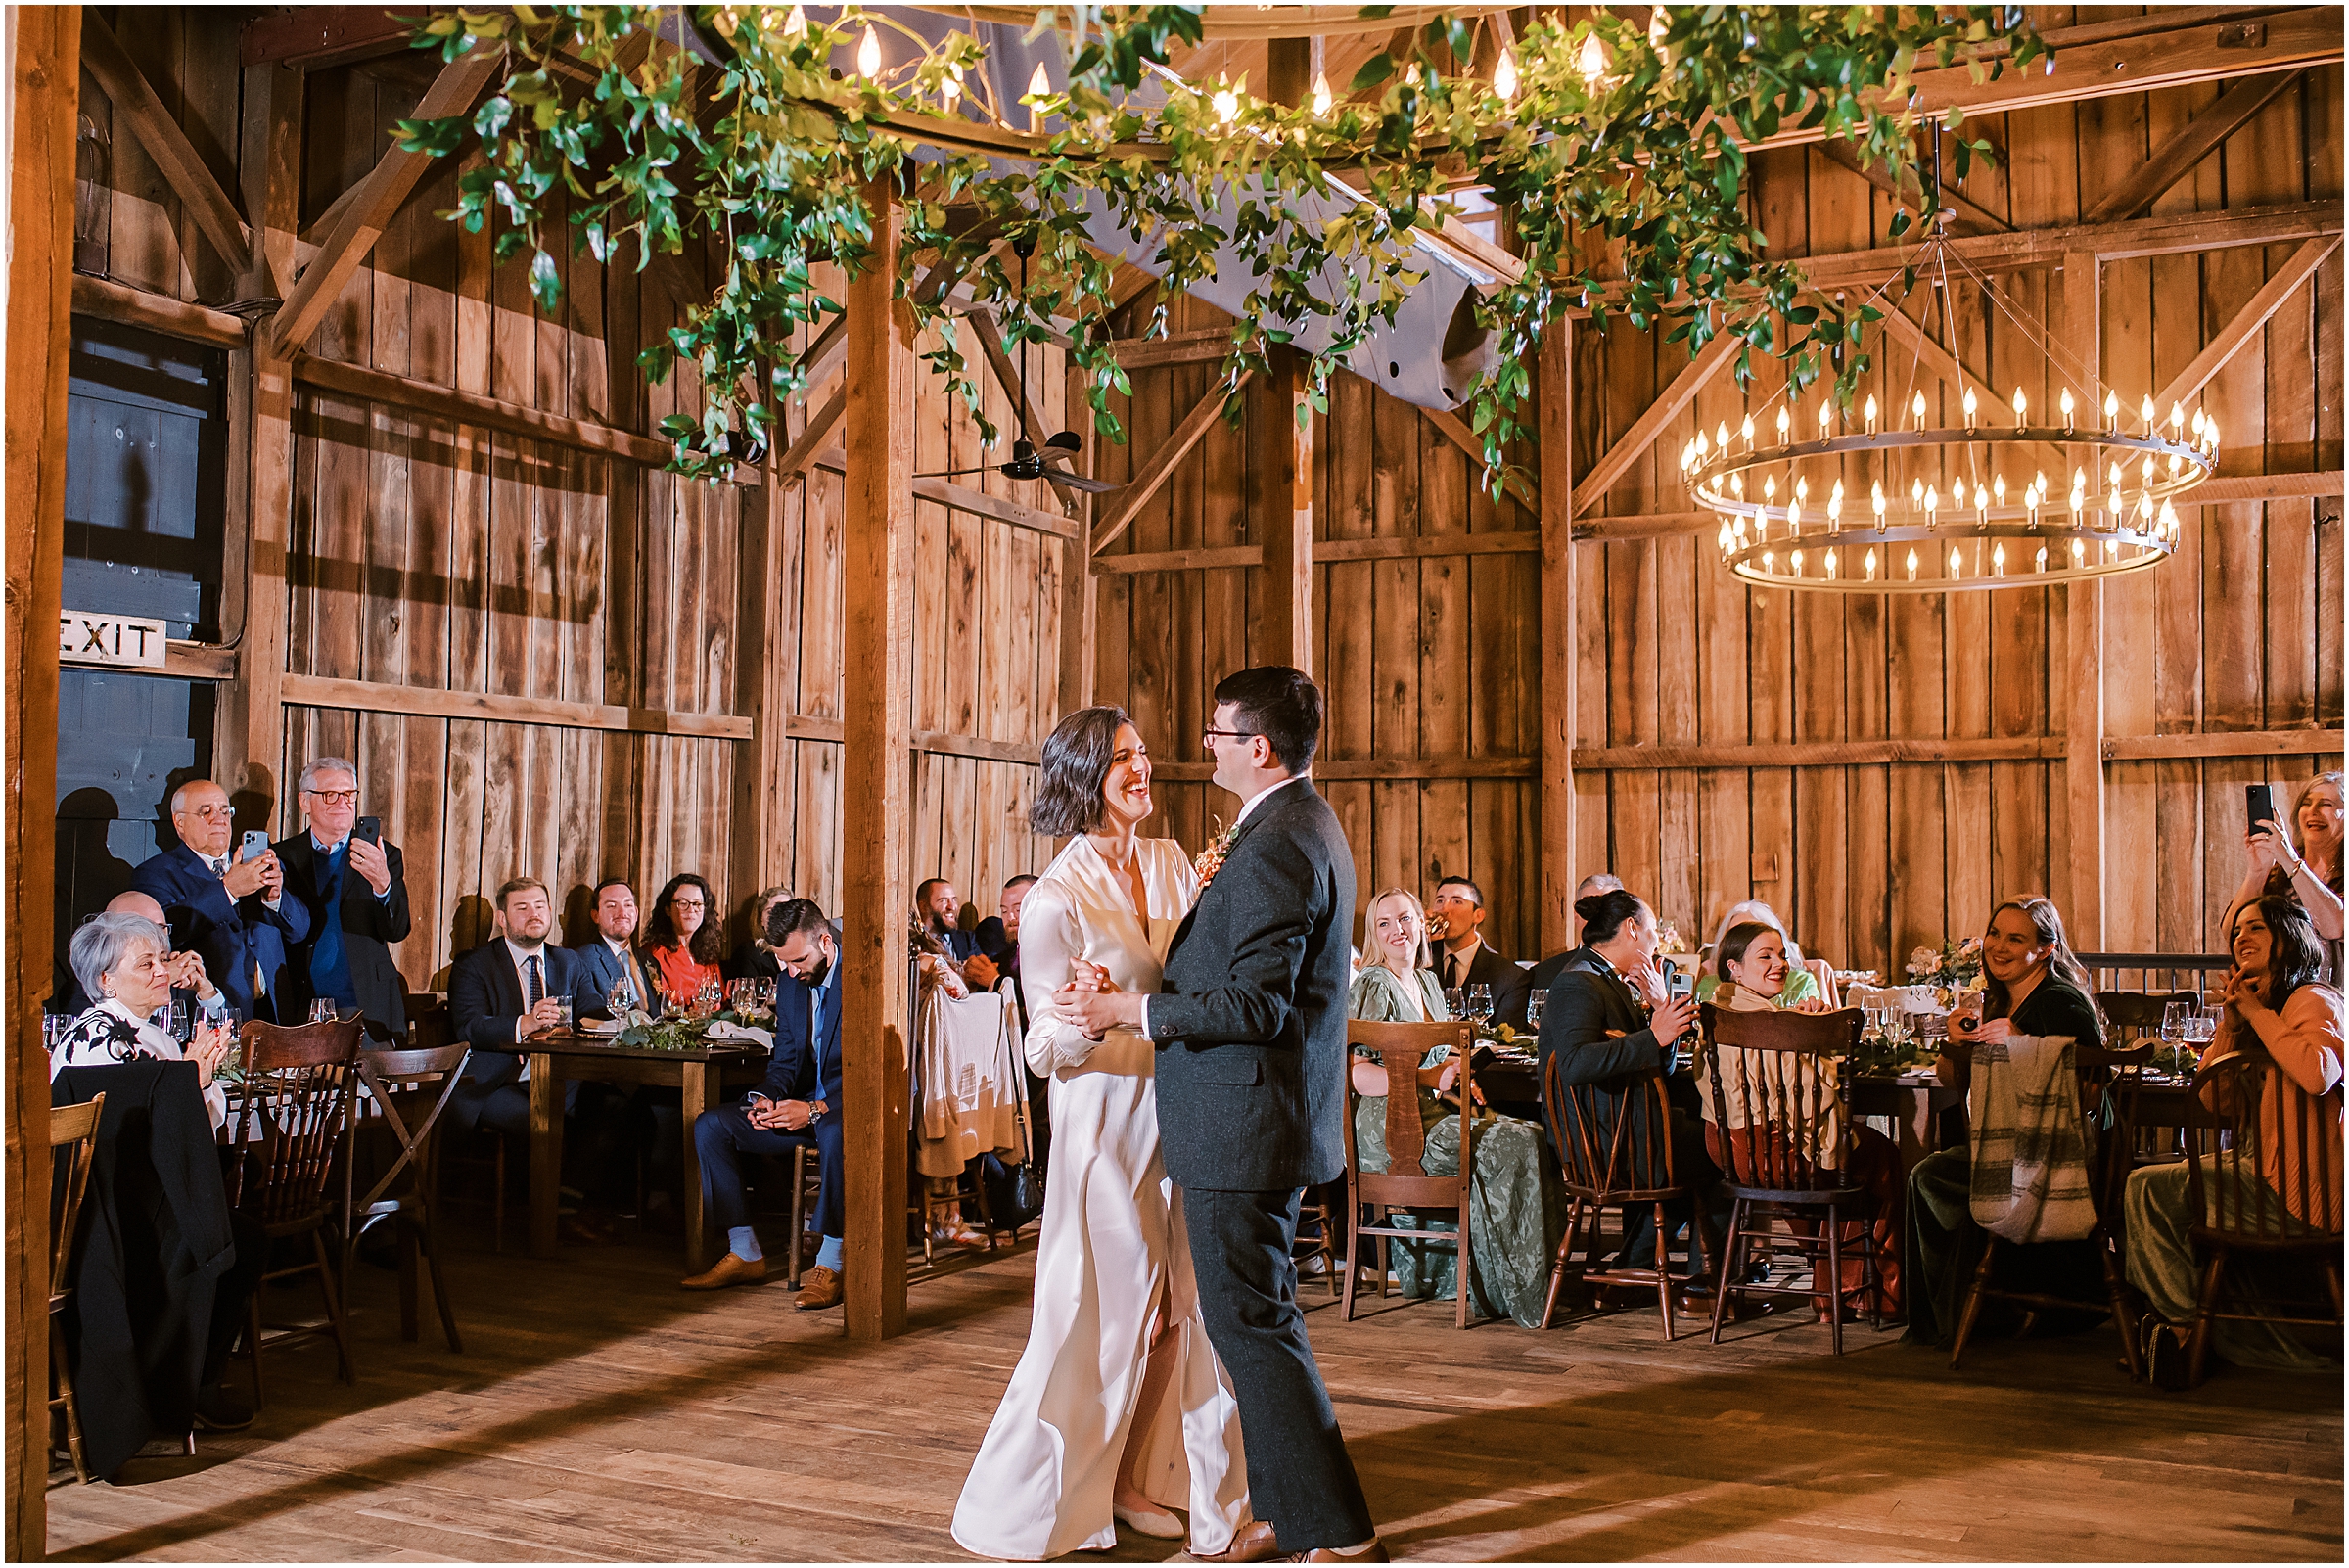 Bride and groom share first dance during winter market themed wedding